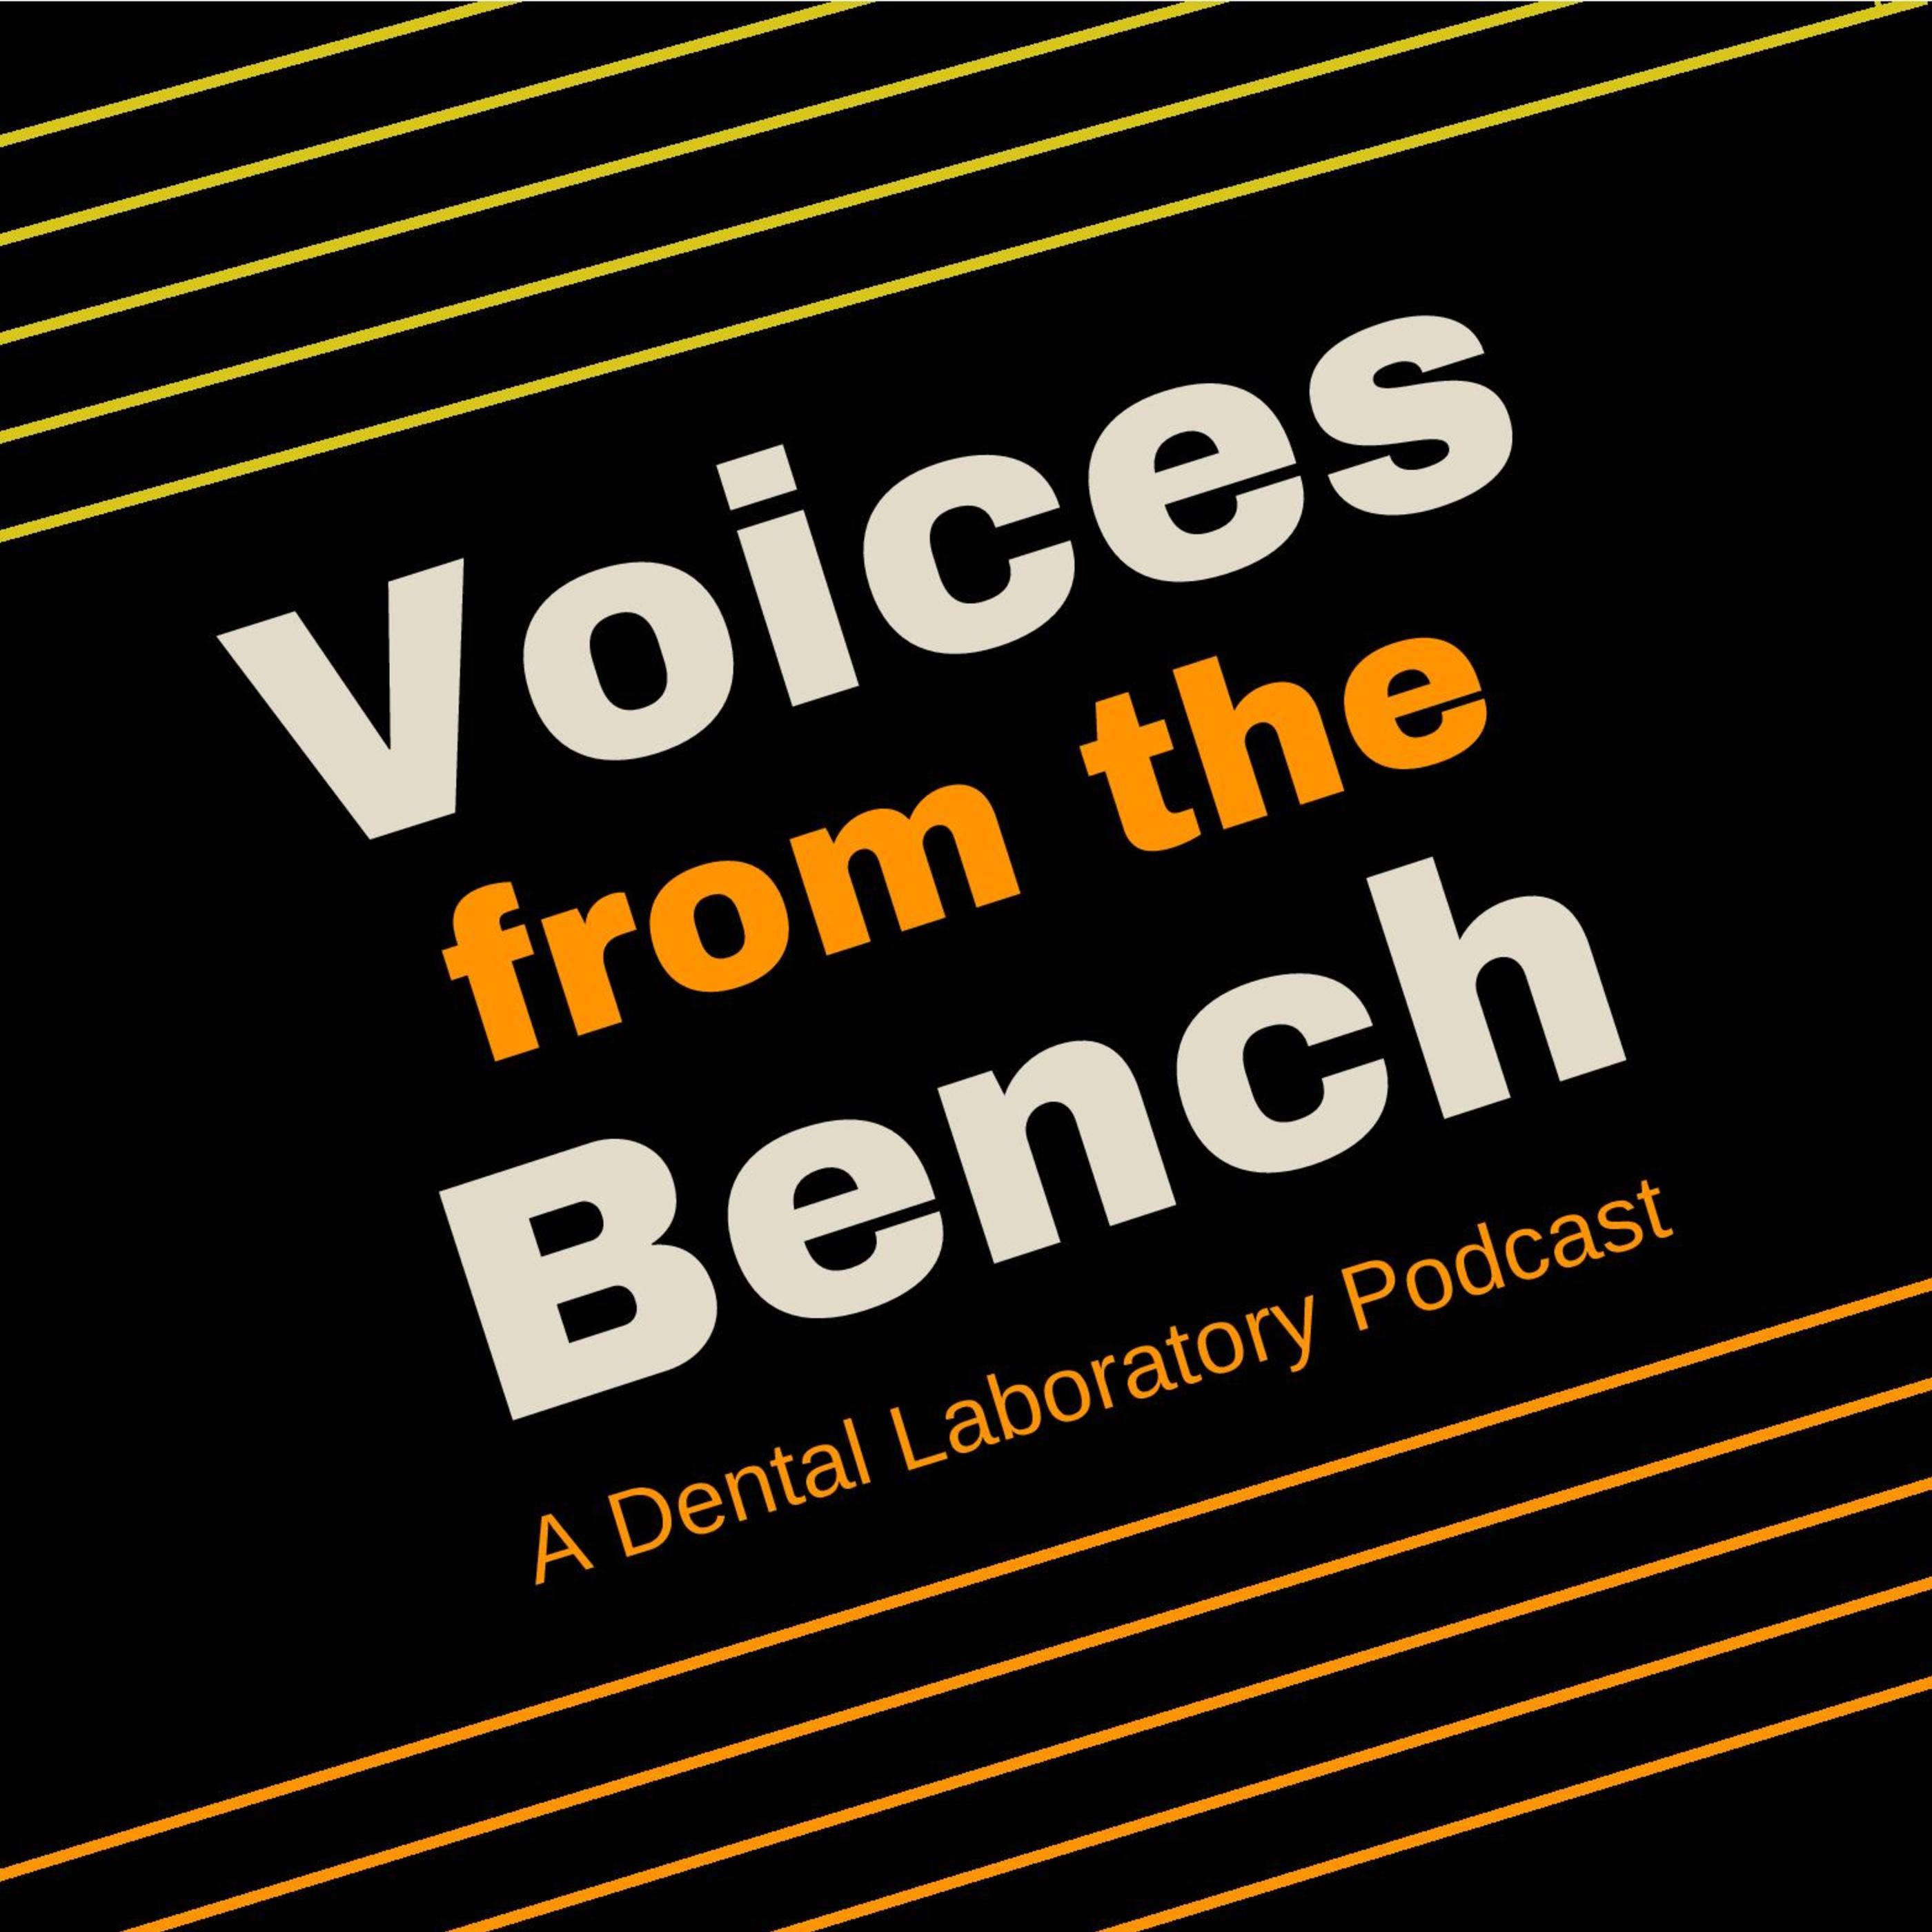 Episode 10: The Heart of Ohio - Lonni Thompson's interview about state regulations for dental laboratories (VFTB10)